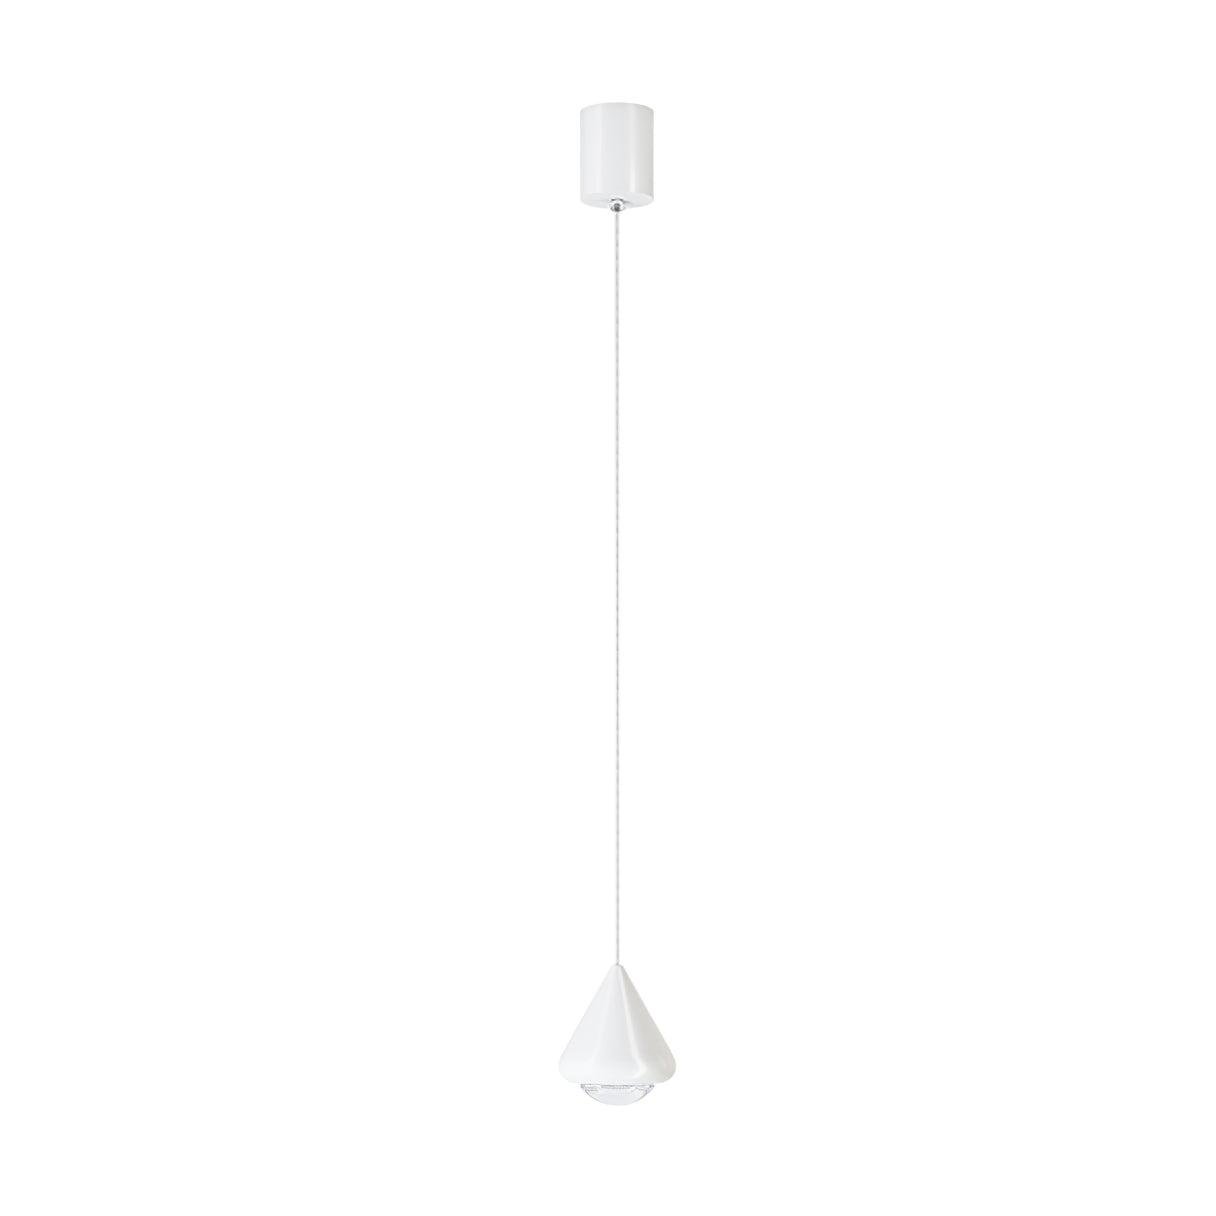 White Apollo Pendant Lamp with 3.9" diameter and 59" height, emitting a cool light. Also available in 10cm diameter and 150cm height.